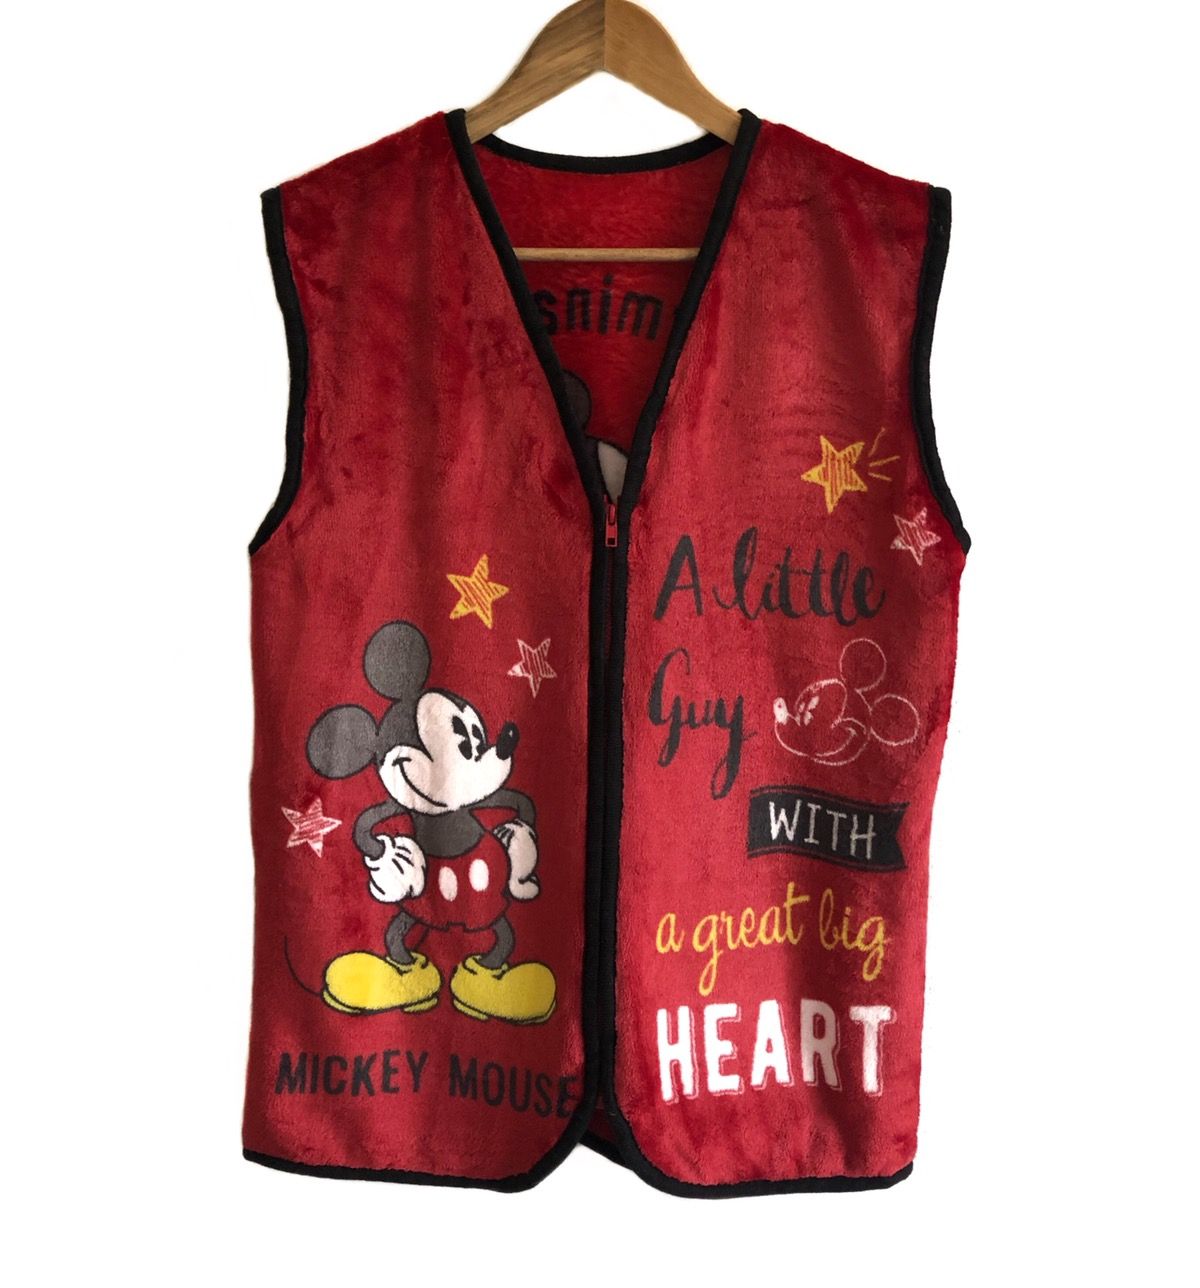 Vintage 80s Mickey Mouse cardigan vests - 1